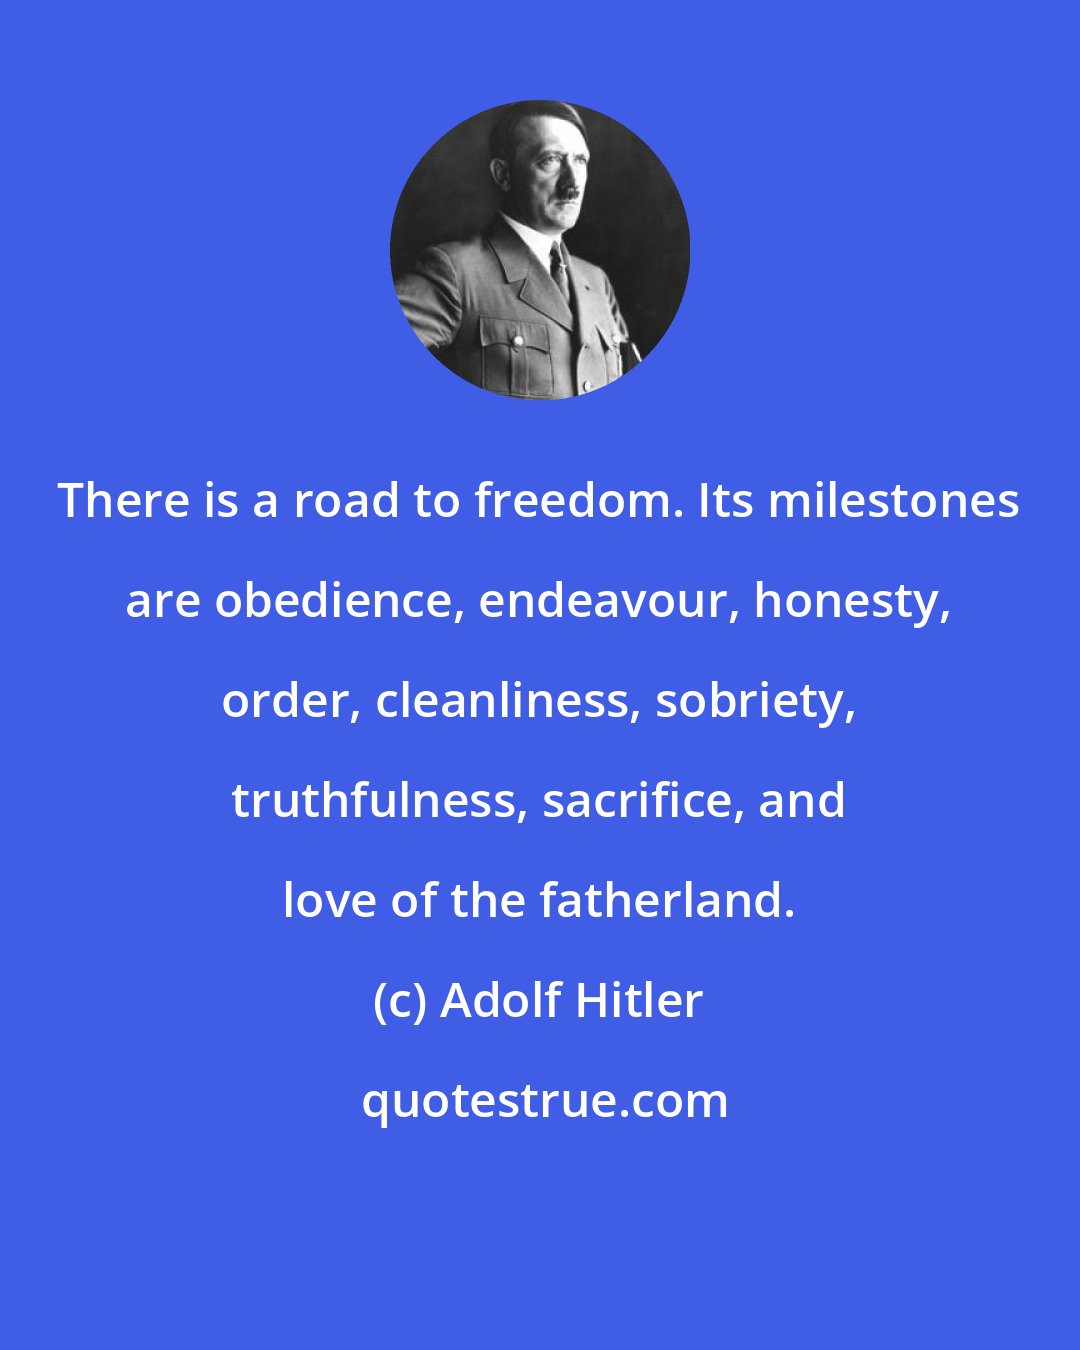 Adolf Hitler: There is a road to freedom. Its milestones are obedience, endeavour, honesty, order, cleanliness, sobriety, truthfulness, sacrifice, and love of the fatherland.